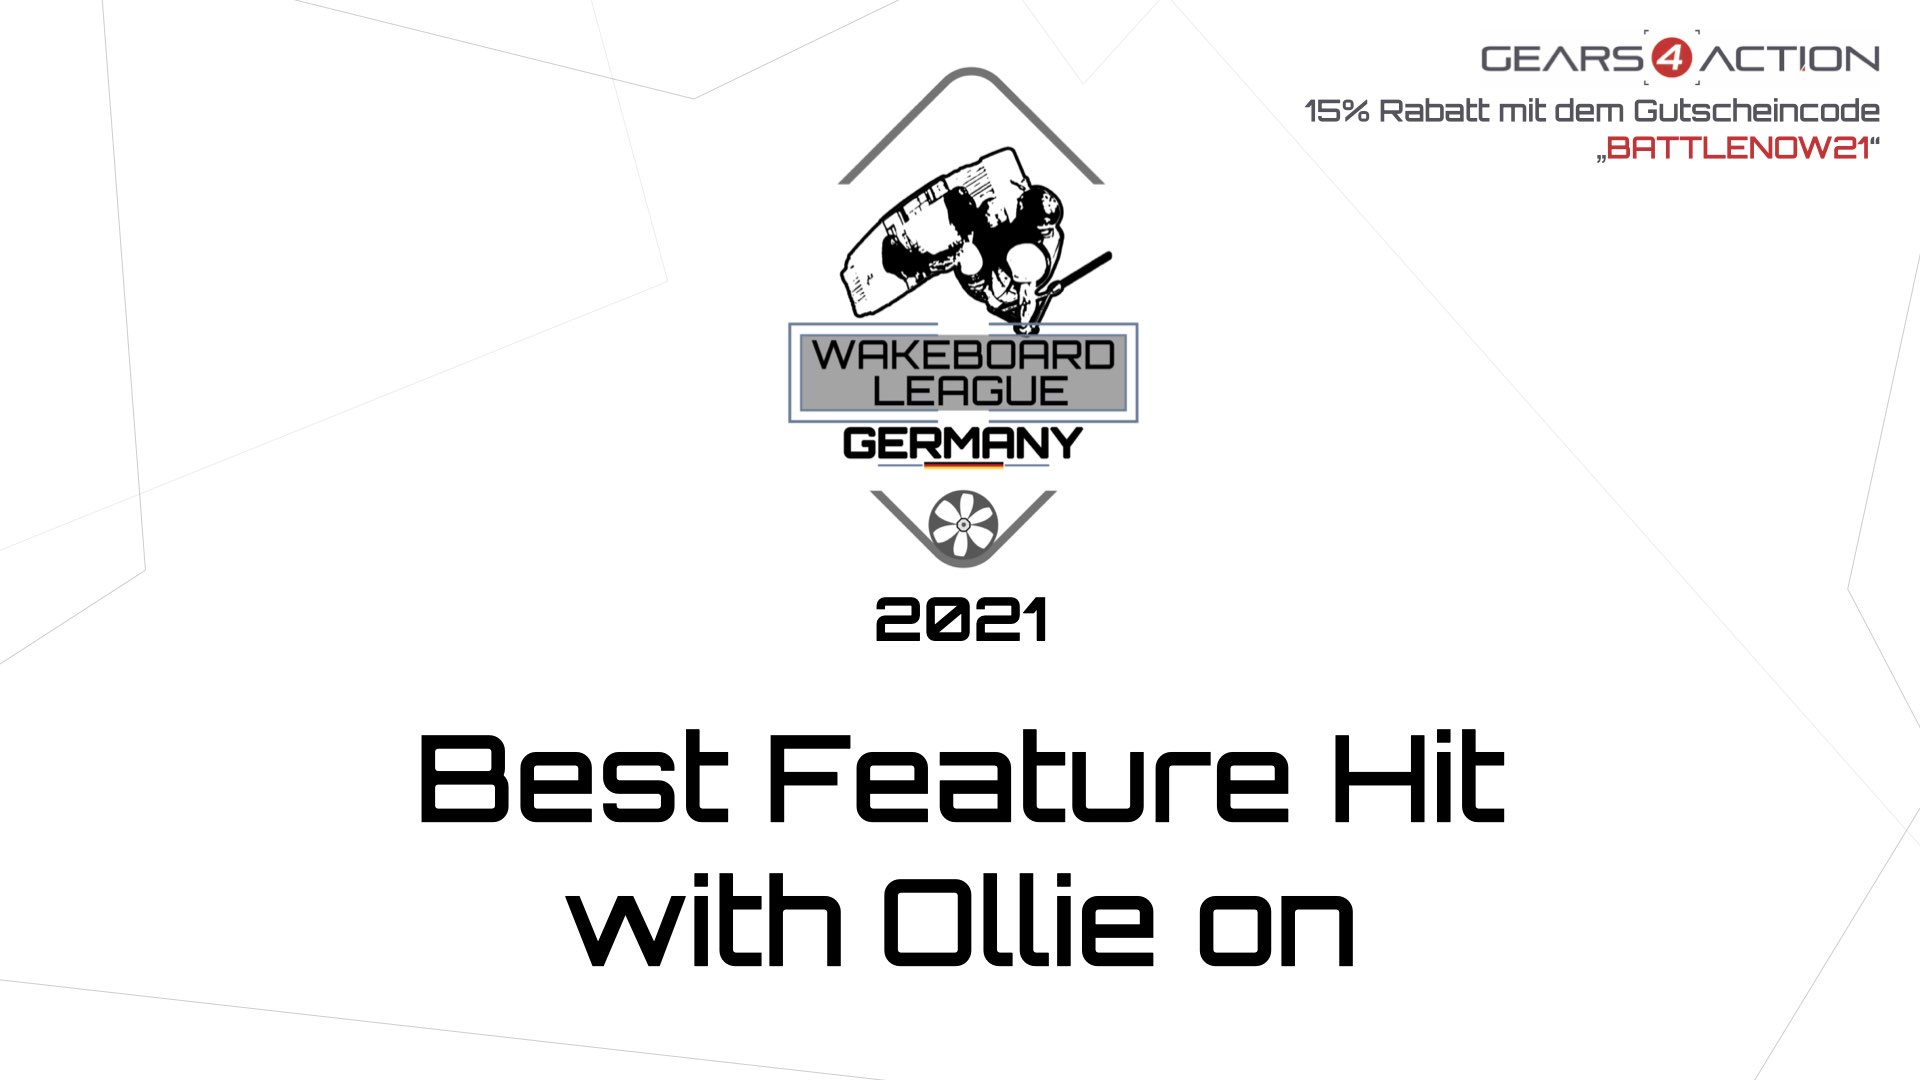 Wakeboard League Germany 2021 - #5 Best Feature Hit with Ollie On